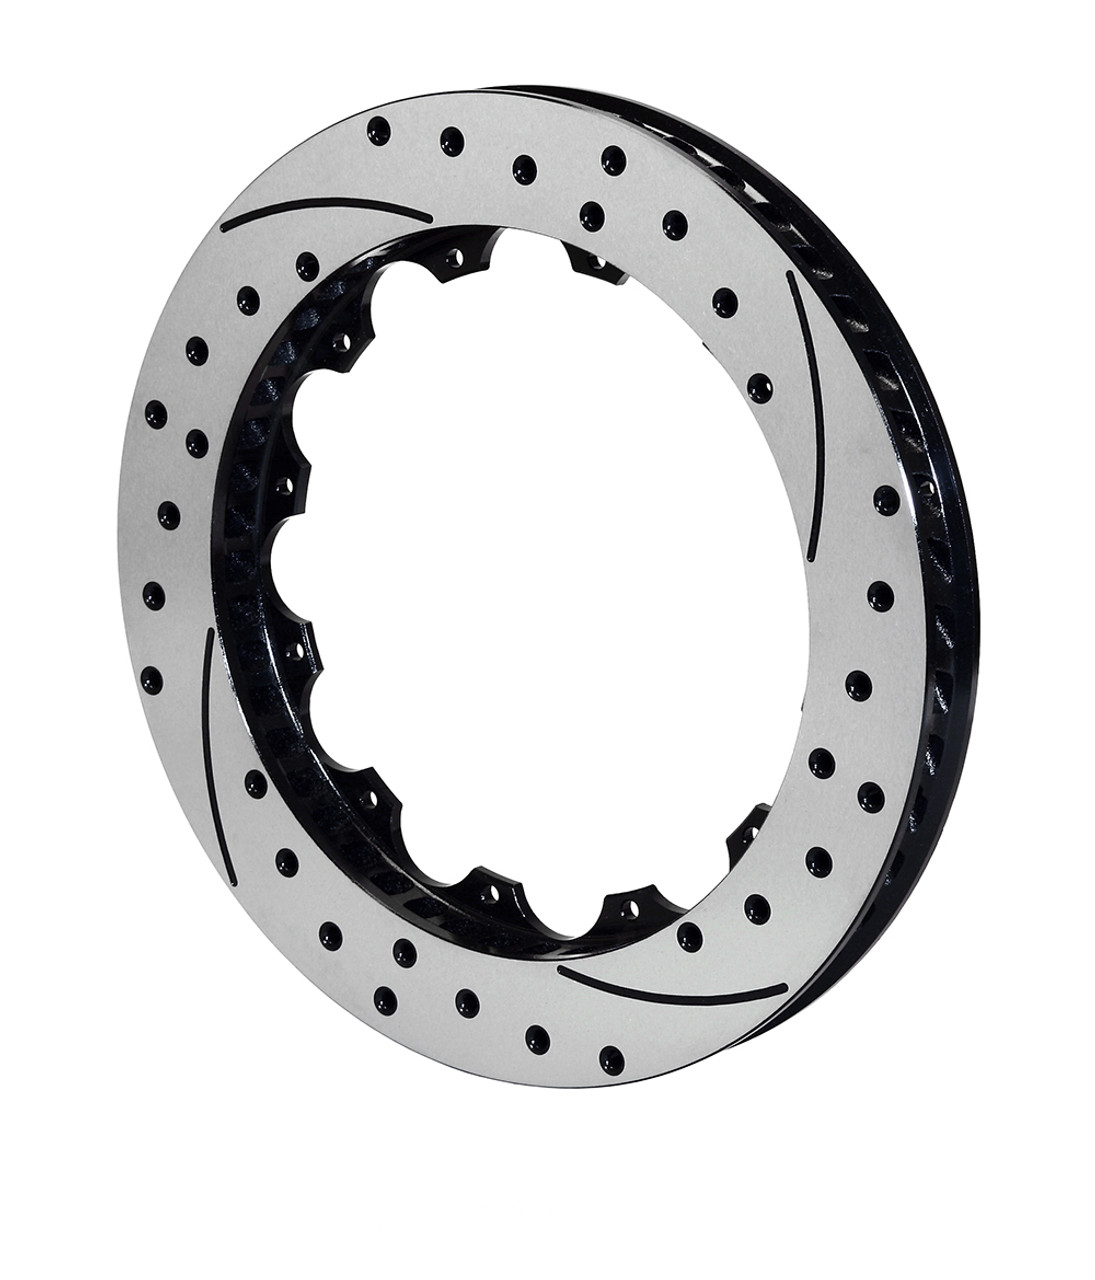 Wilwood SRP Drilled & Slotted Replacement Rotor Rings for Superlite 6R Front Brake Kit for MK5 & MK6